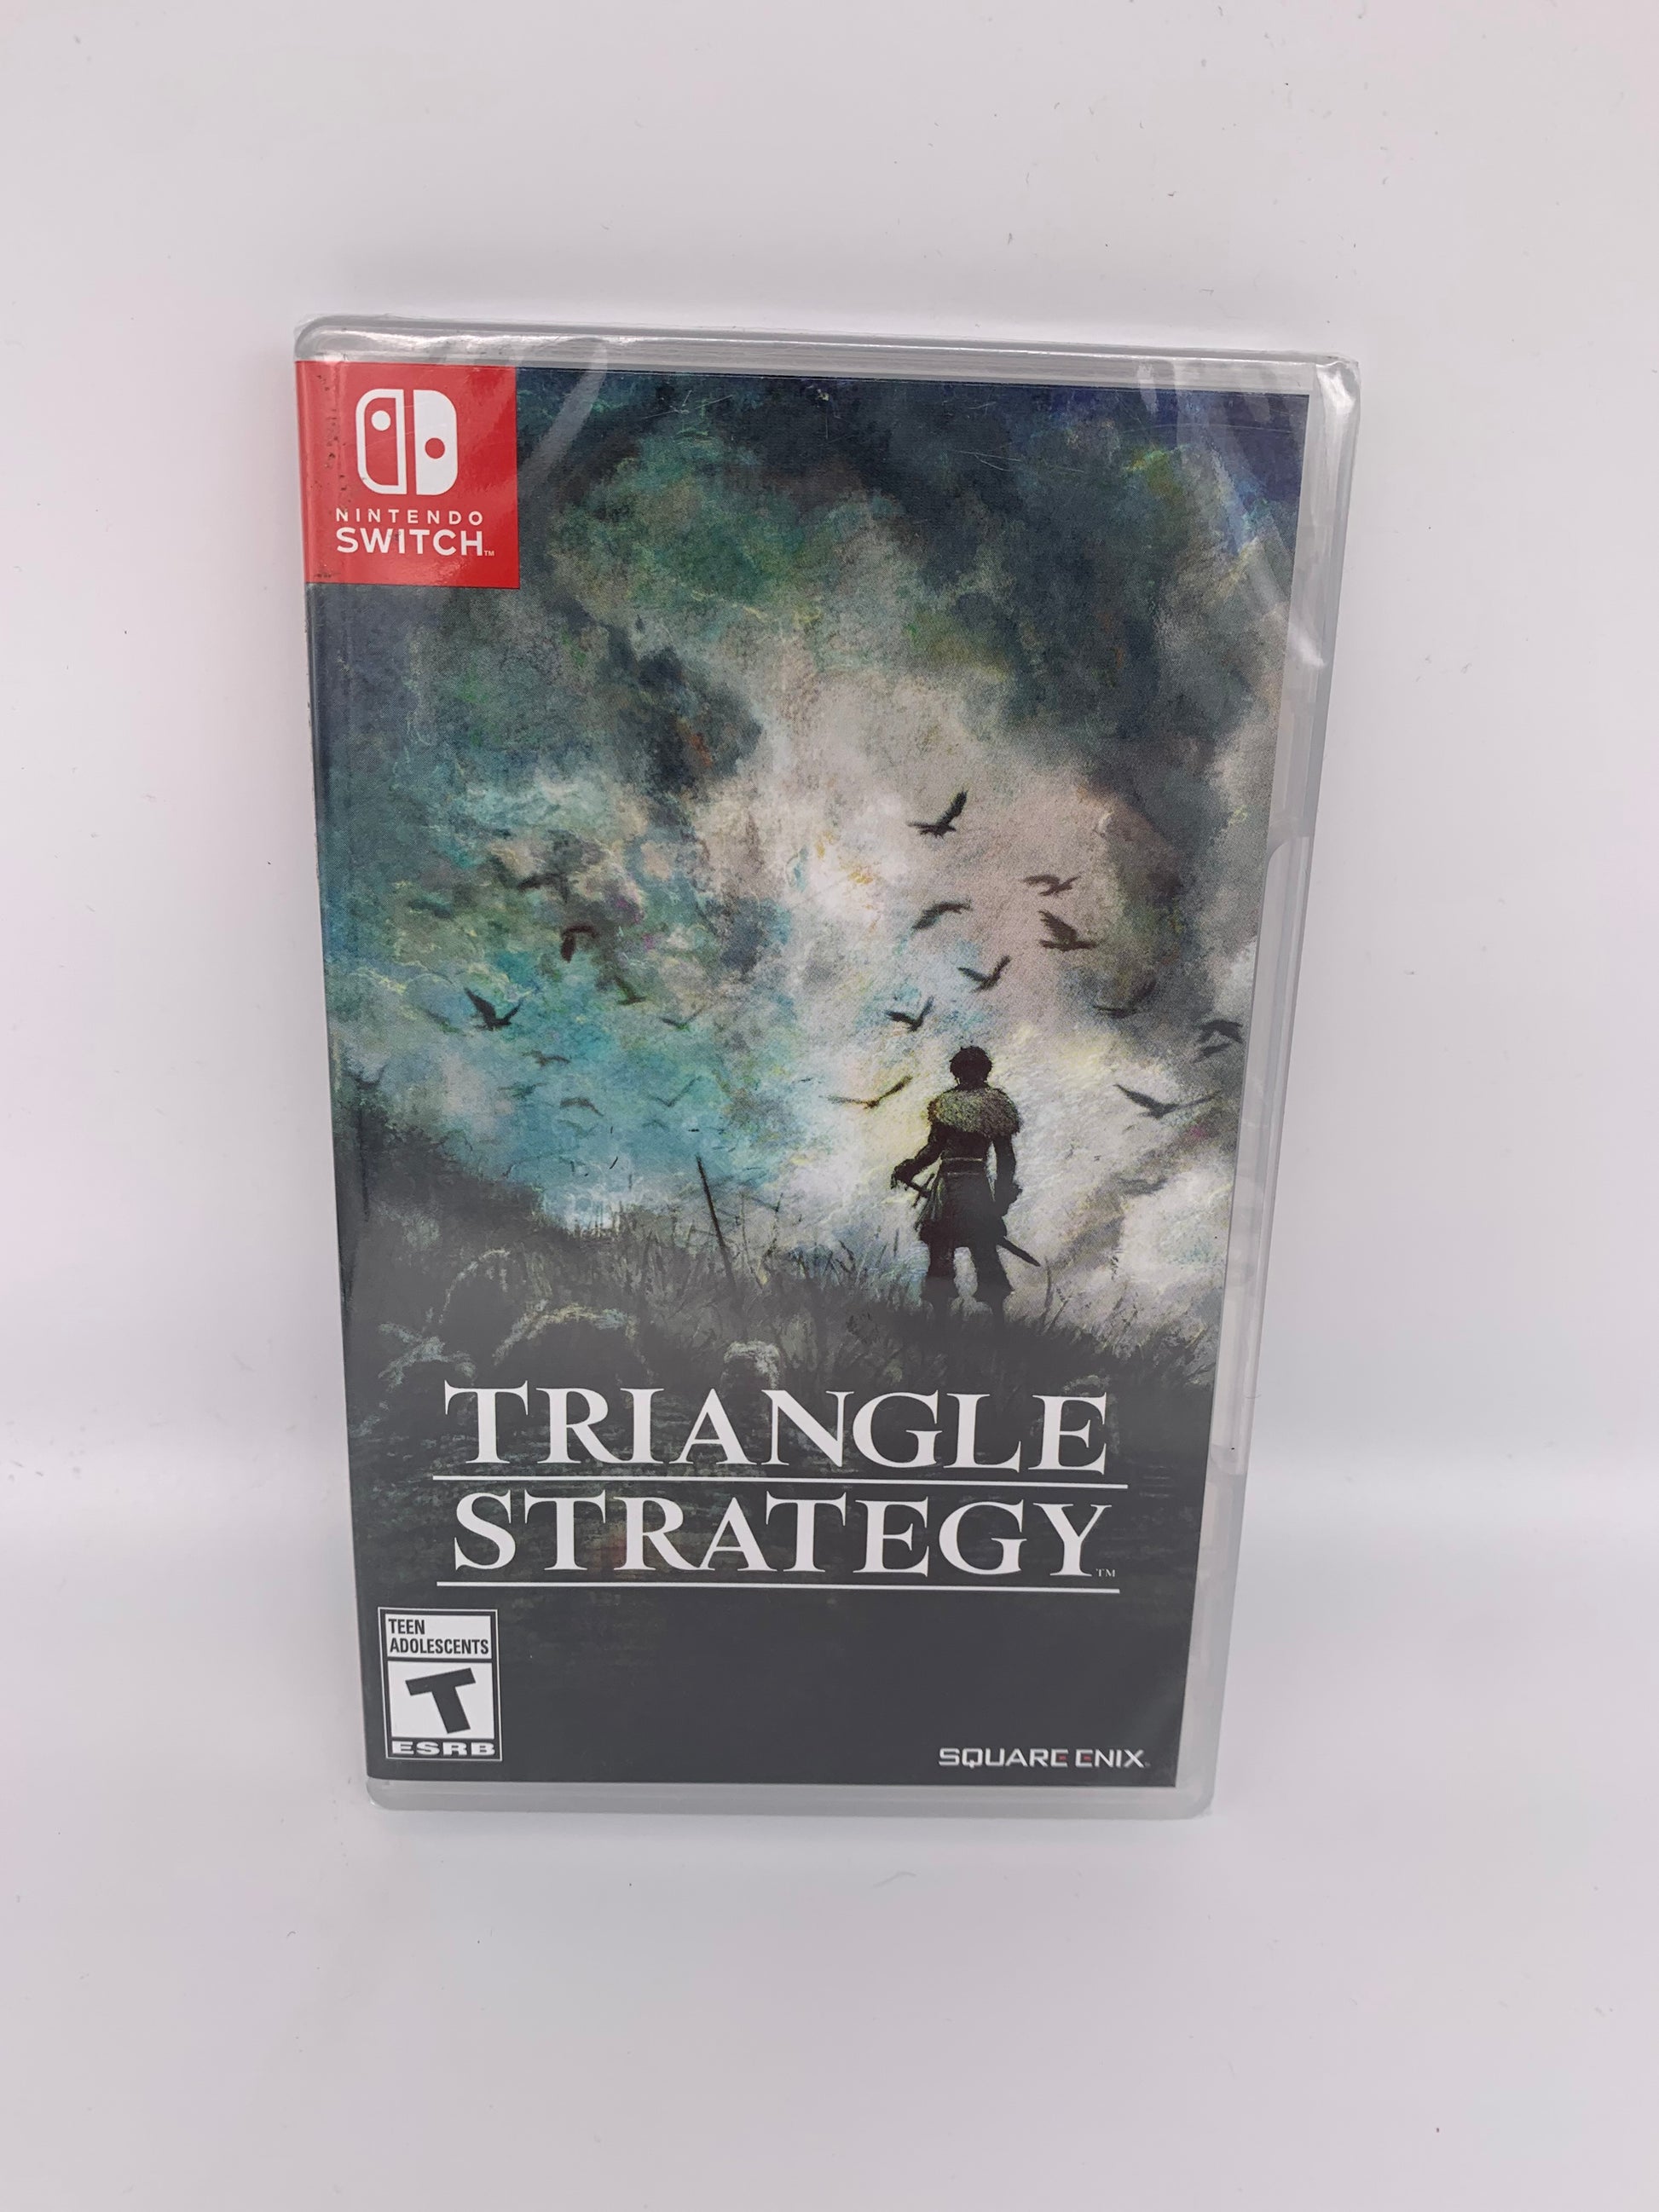 PiXEL-RETRO.COM : NINTENDO SWITCH NEW SEALED IN BOX COMPLETE MANUAL GAME NTSC TRIANGLE STRATEGY